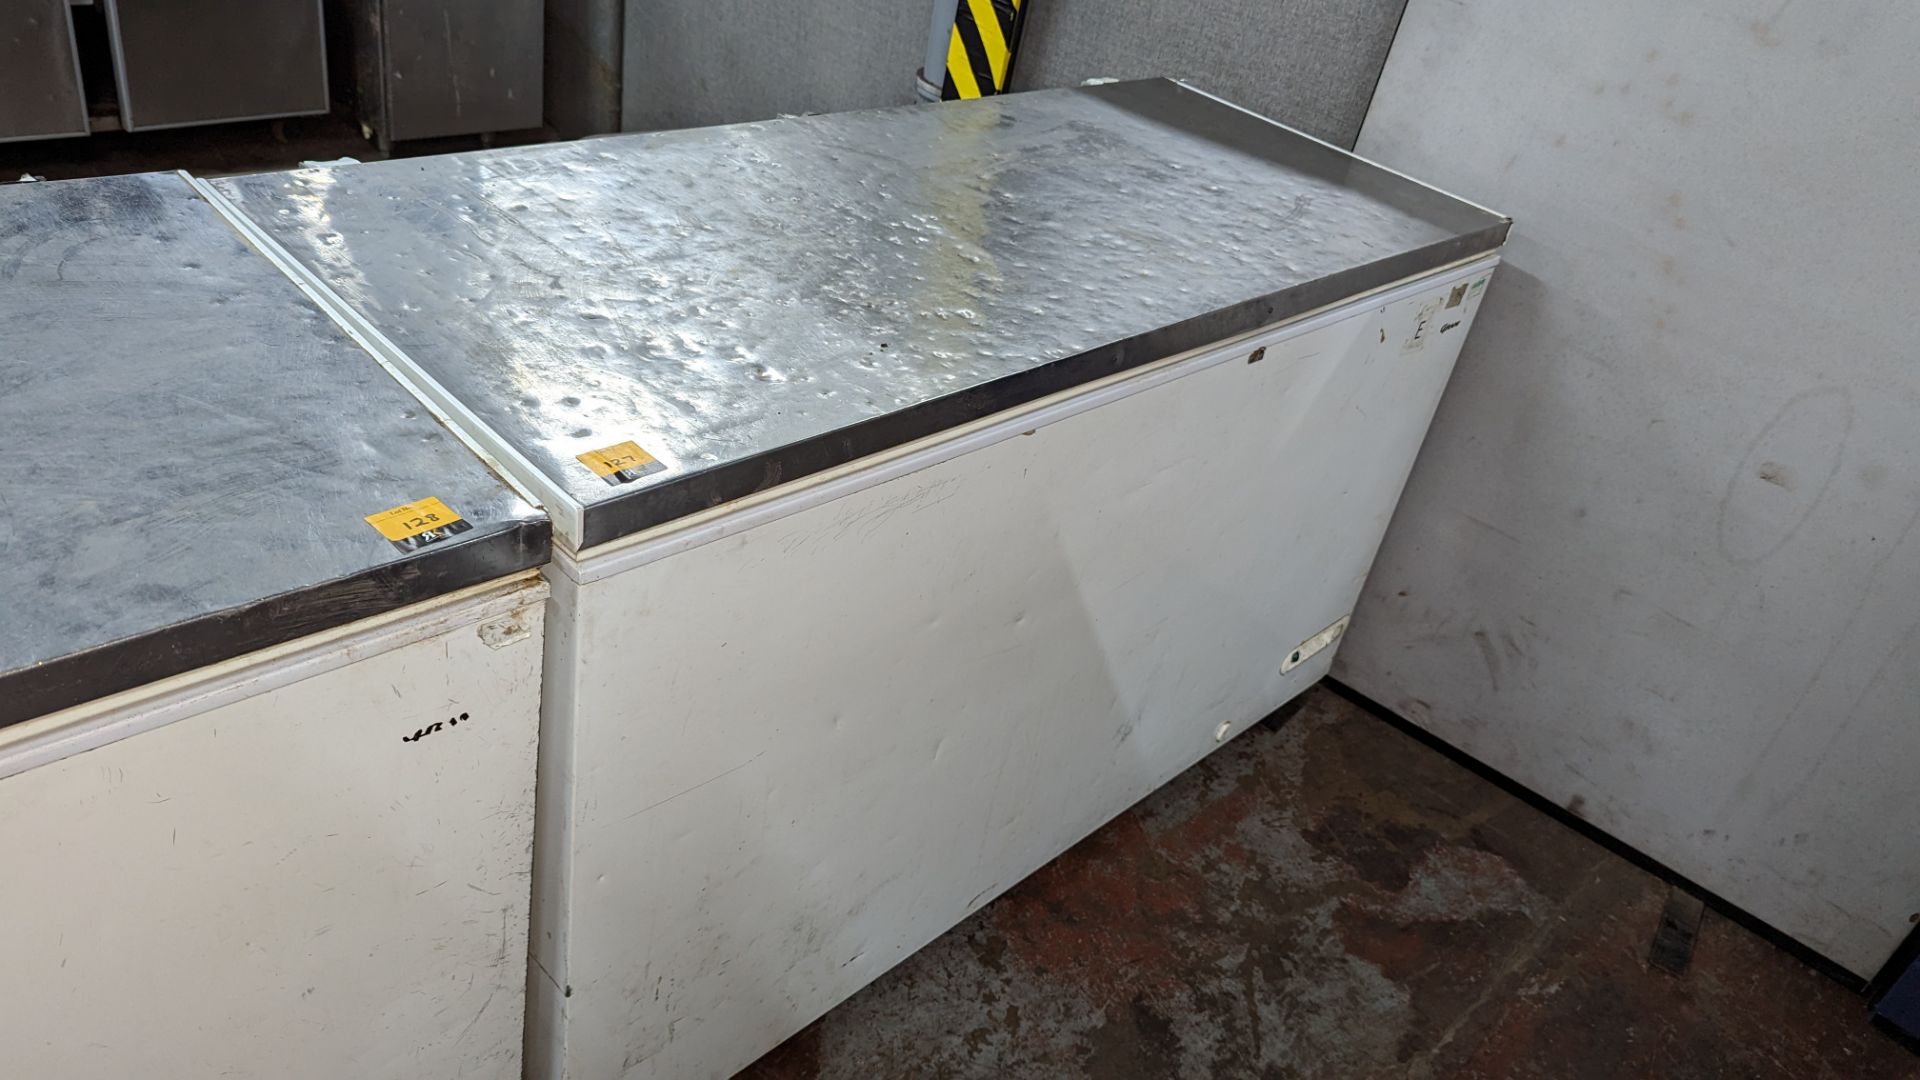 Chest freezer with stainless steel topped lid, approximately 150cm long